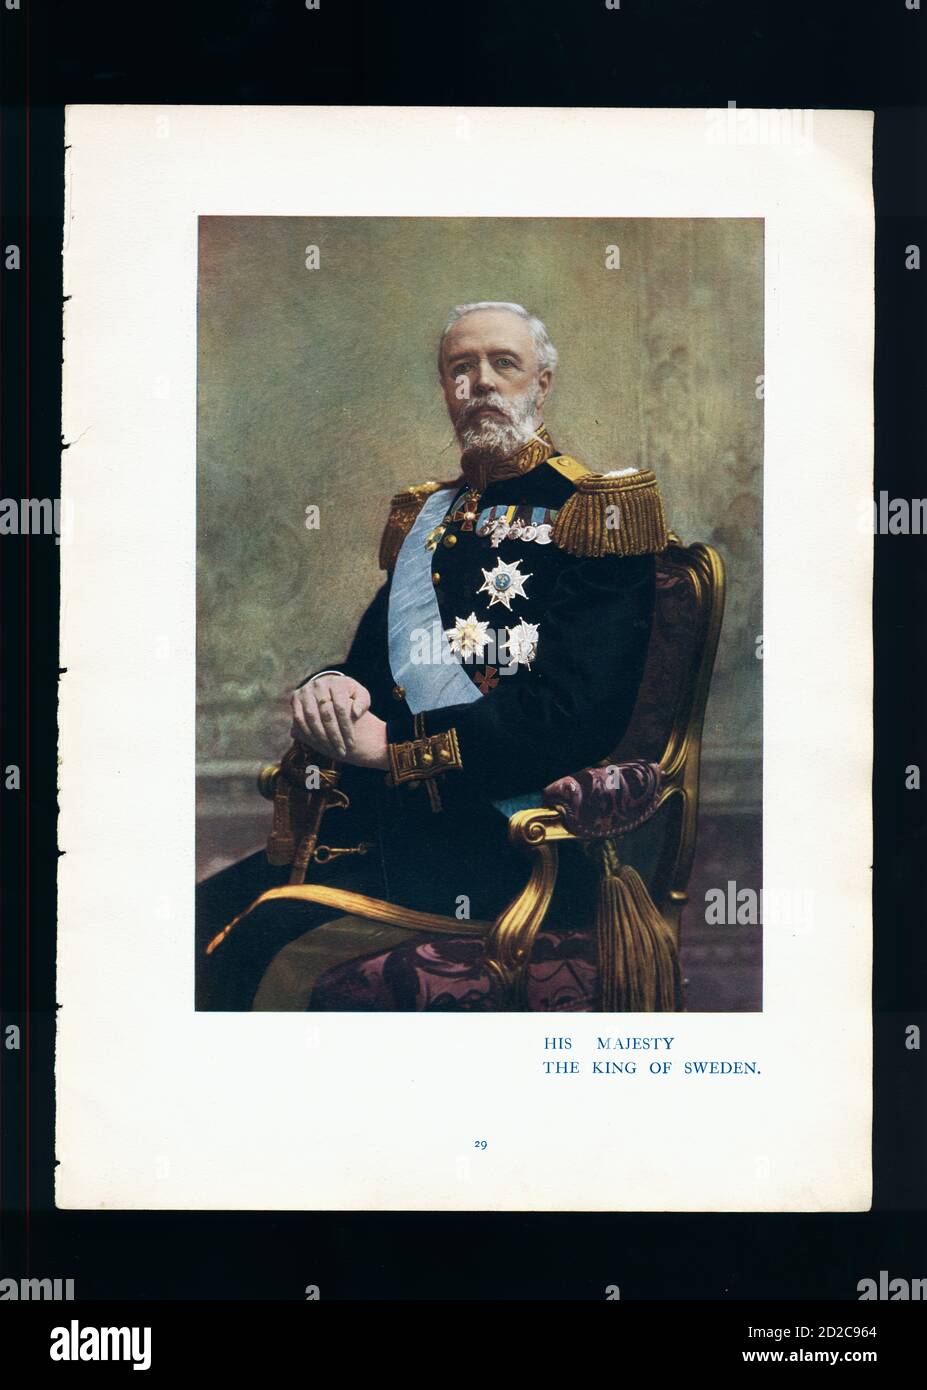 Chromolithographic portrait of King Oscar II of Sweden (21 January 1829 – 8 December 1907). He reigned from 18 September 1872 to 8 December 1907. Imag Stock Photo